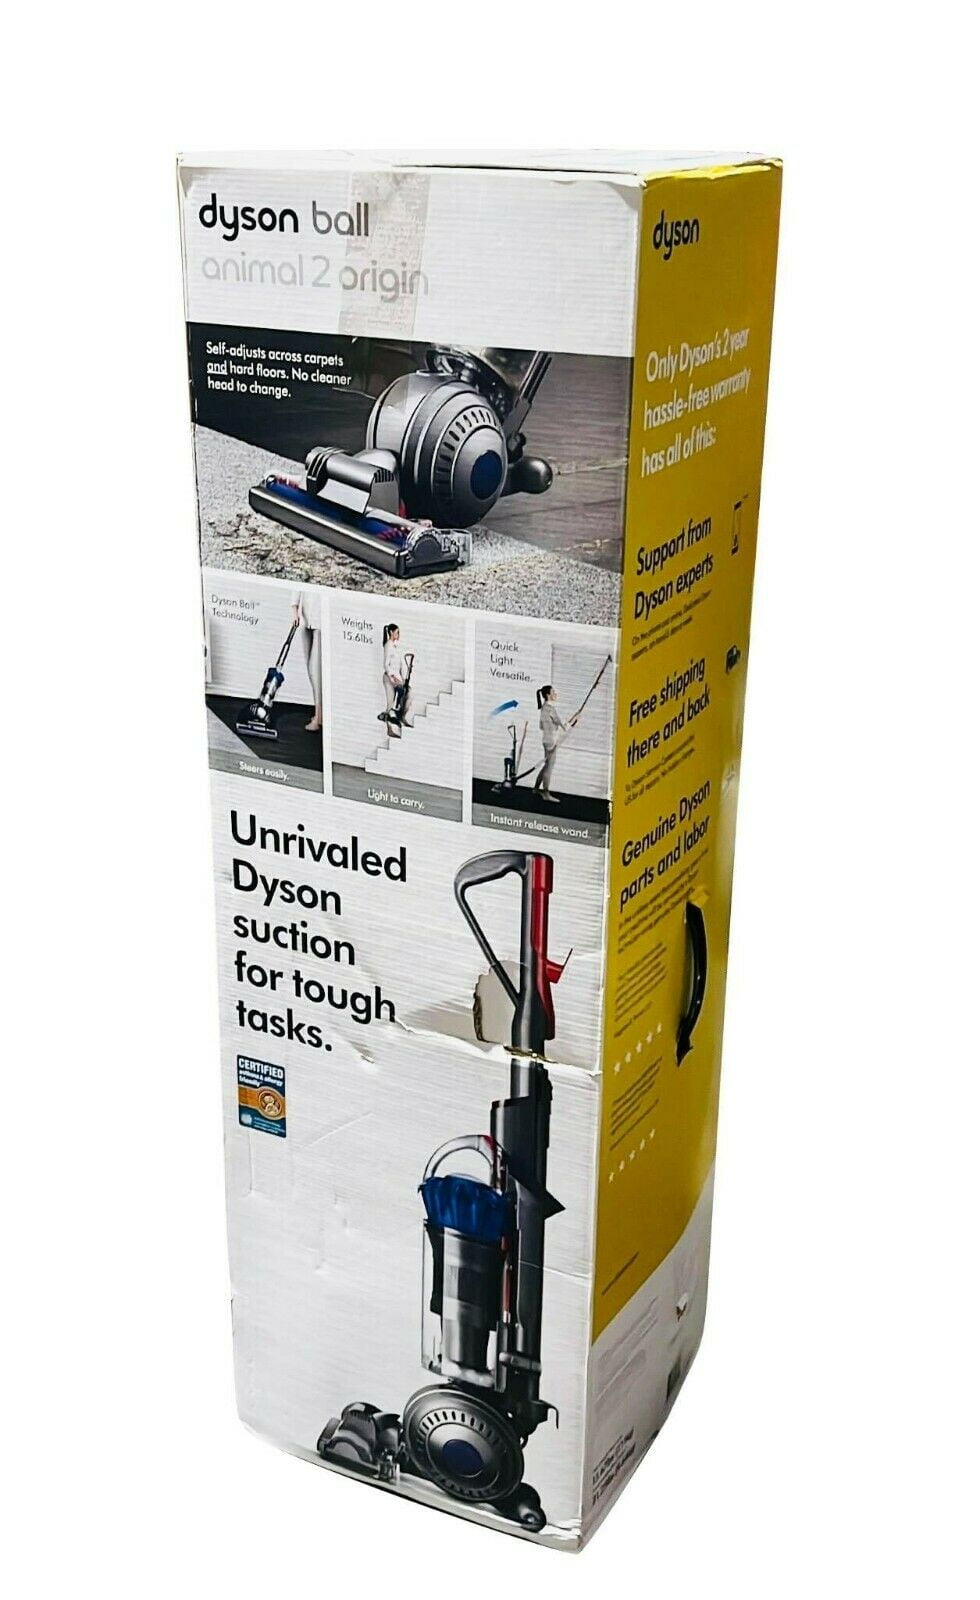 Buy Dyson Ball Animal 2 Origin Upright Vacuum Cleaner | Blue | New Online  at Lowest Price in Ubuy Comoros. 355585582